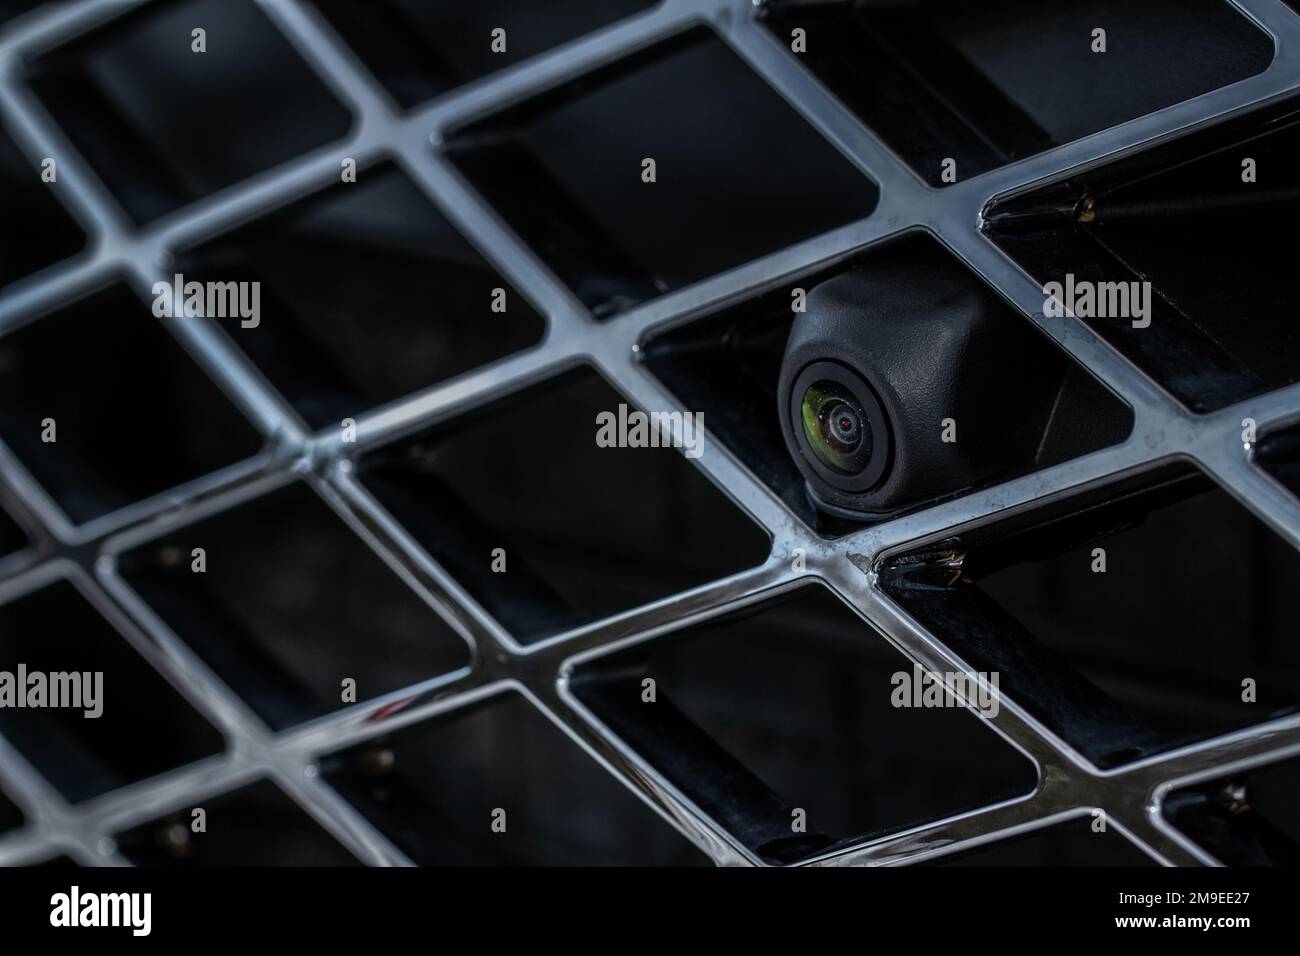 https://c8.alamy.com/comp/2M9EE27/close-up-view-of-front-parking-assist-video-camera-on-the-car-front-view-camera-of-modern-car-2M9EE27.jpg